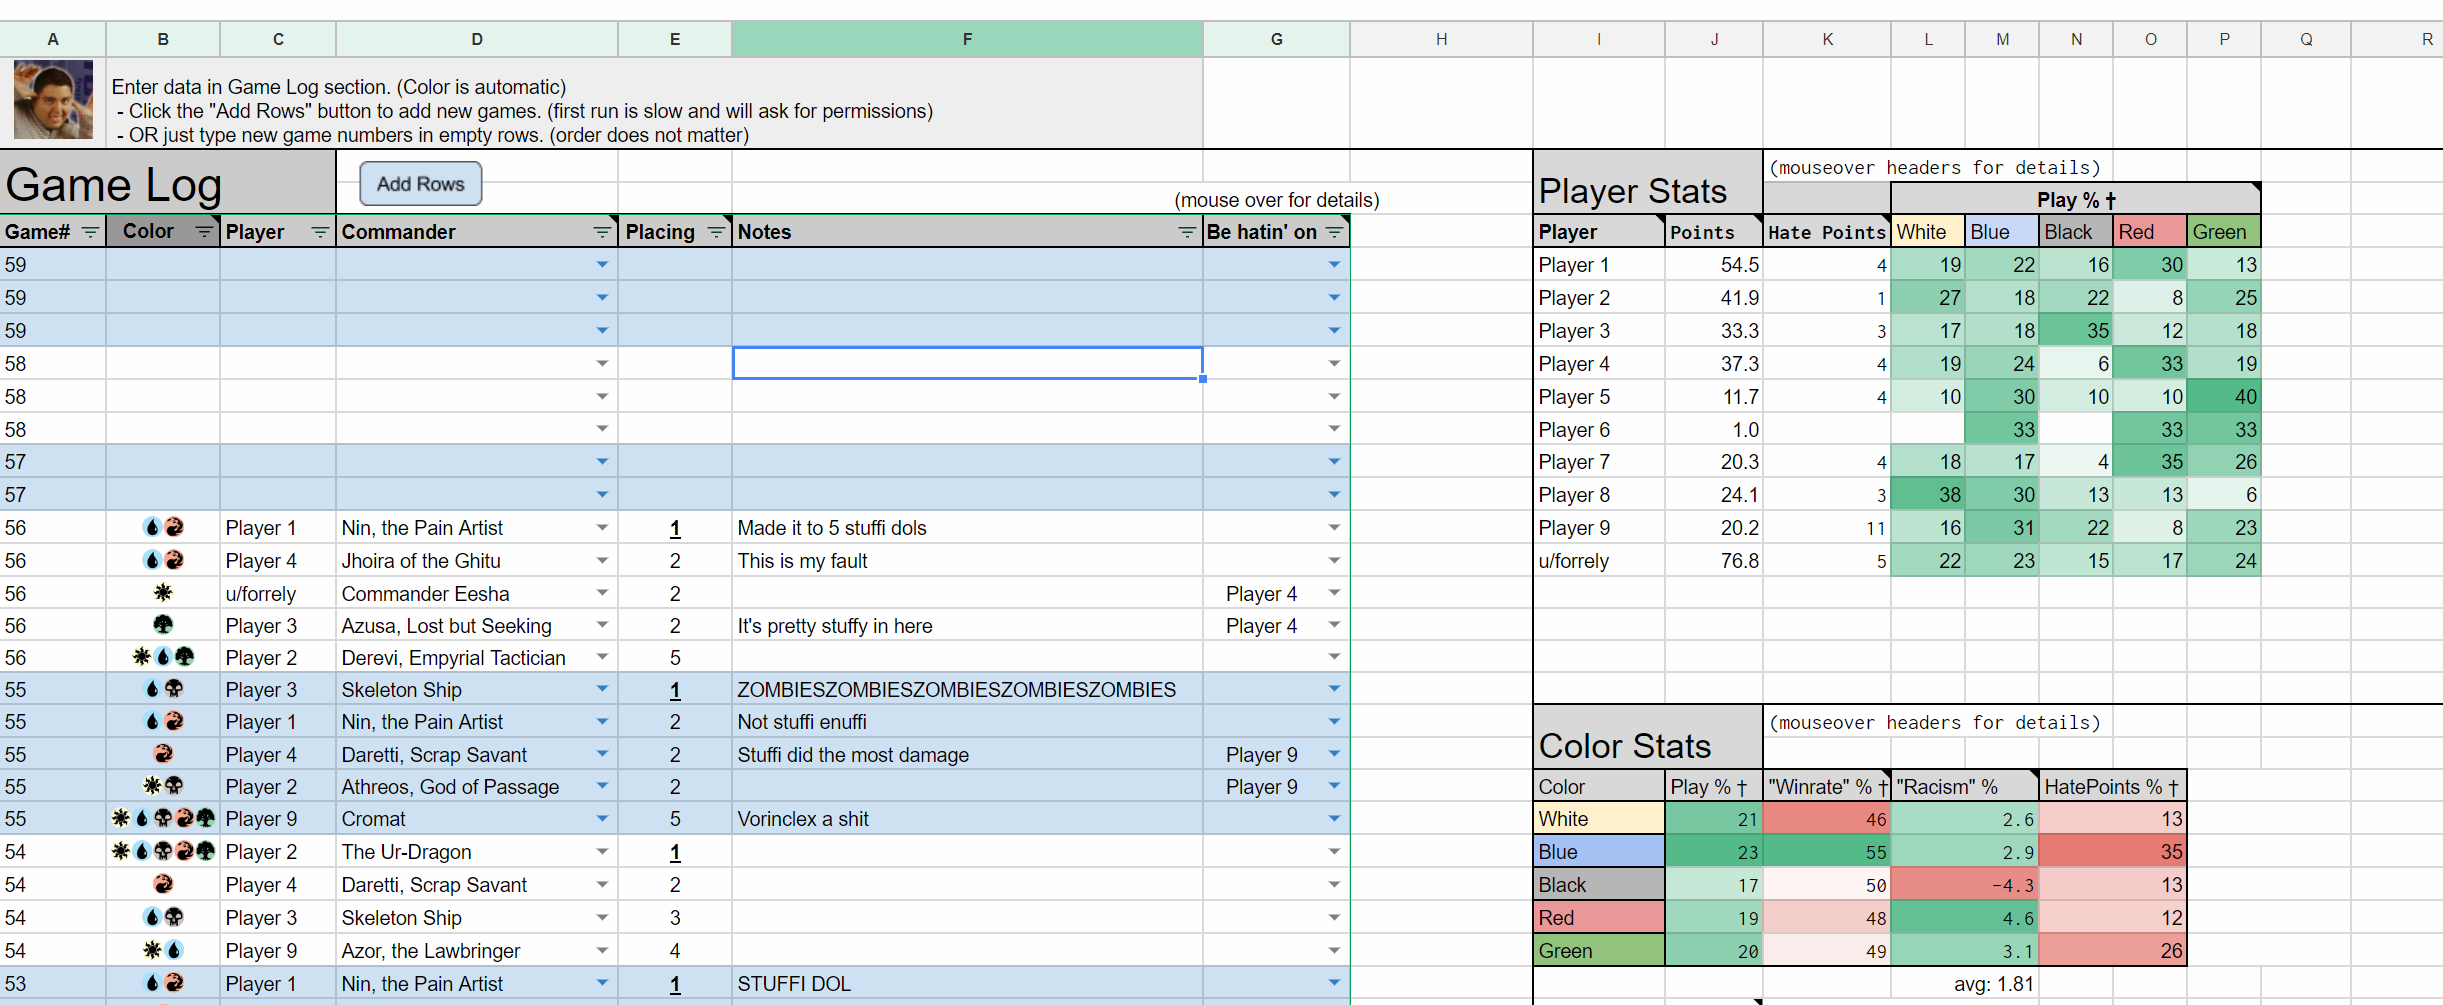 Mtg Spreadsheet Inside Working On A Spreadsheet For Recording Games. : Edh